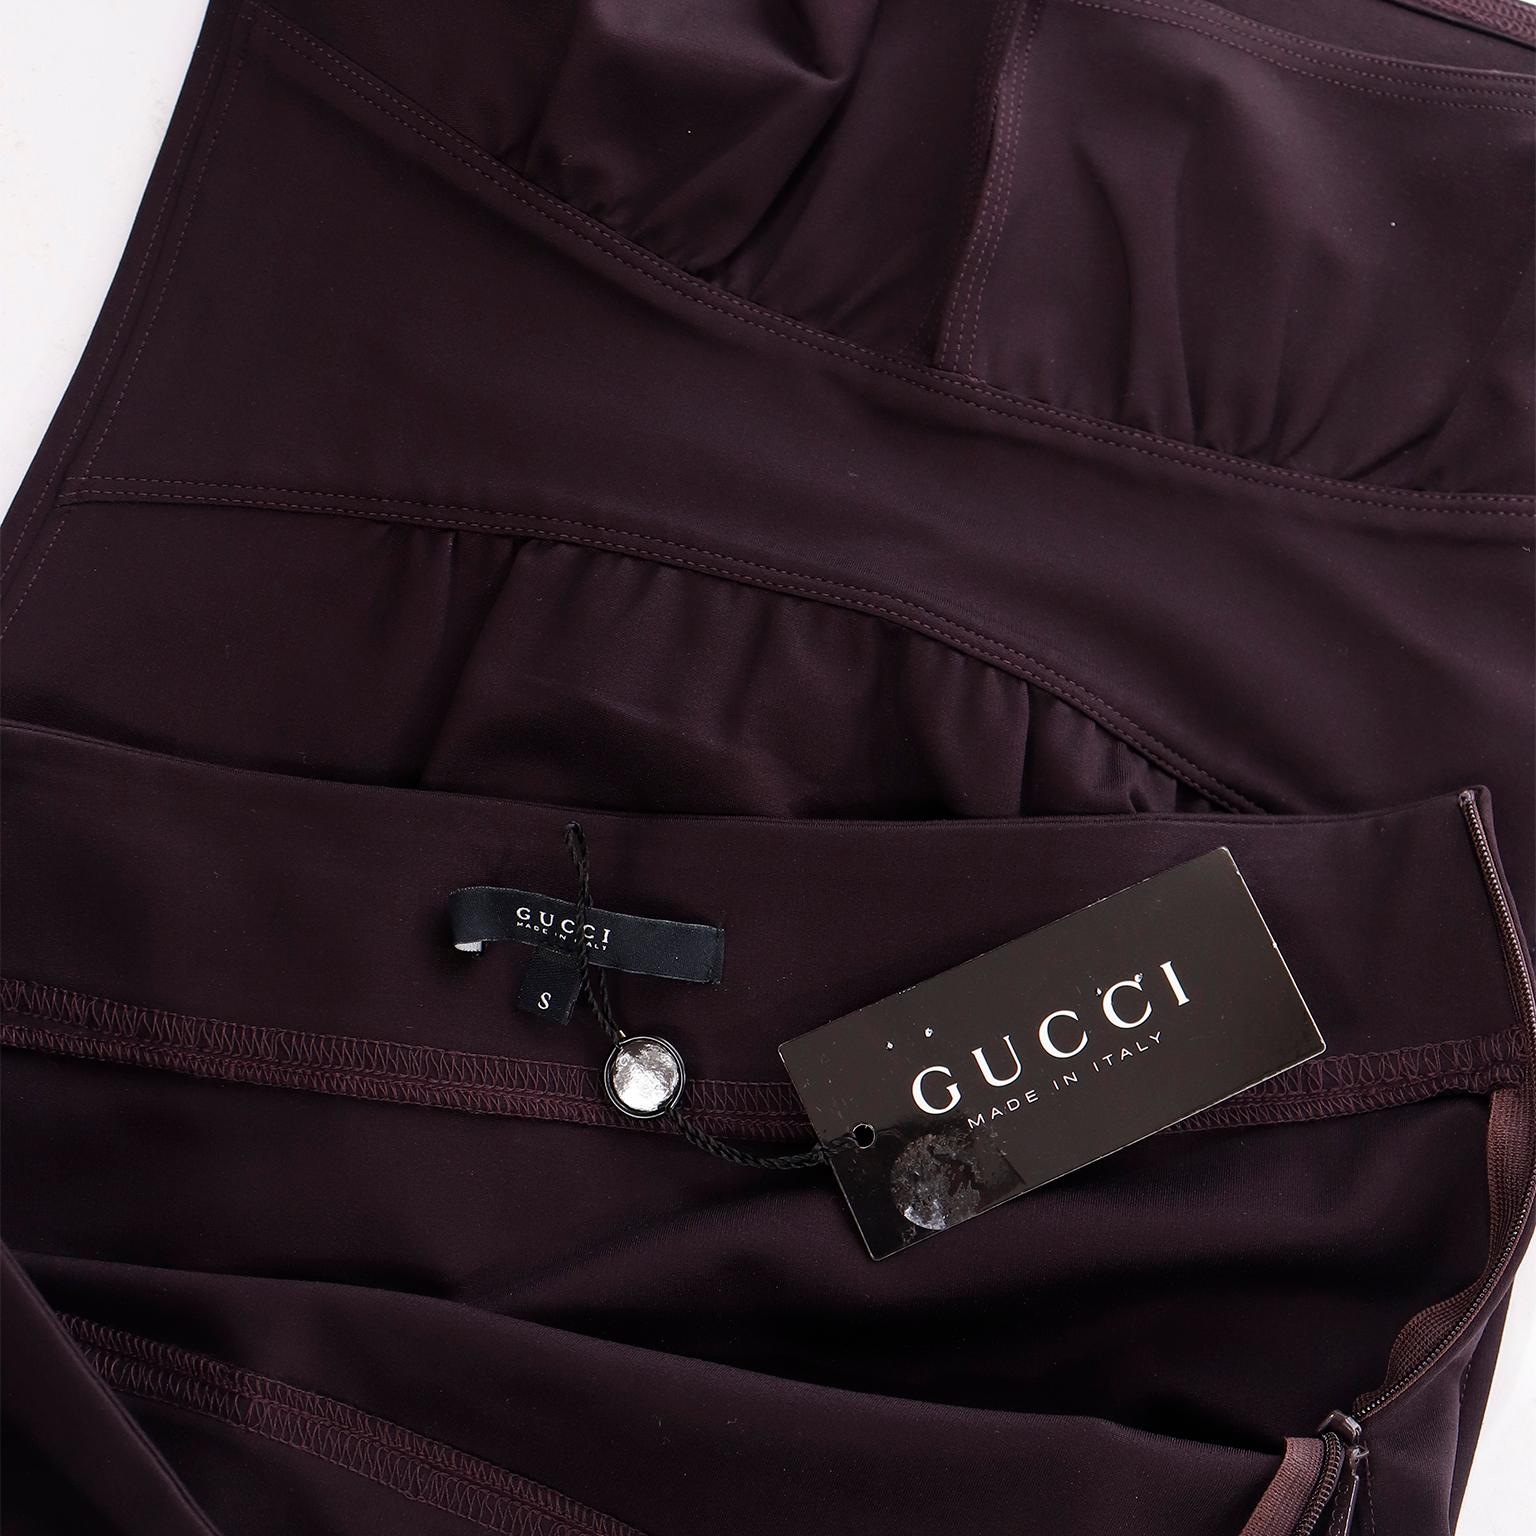 Tom Ford Gucci 2004 Purple Brown Silk Runway Skirt Deadstock w Original Tags For Sale 2